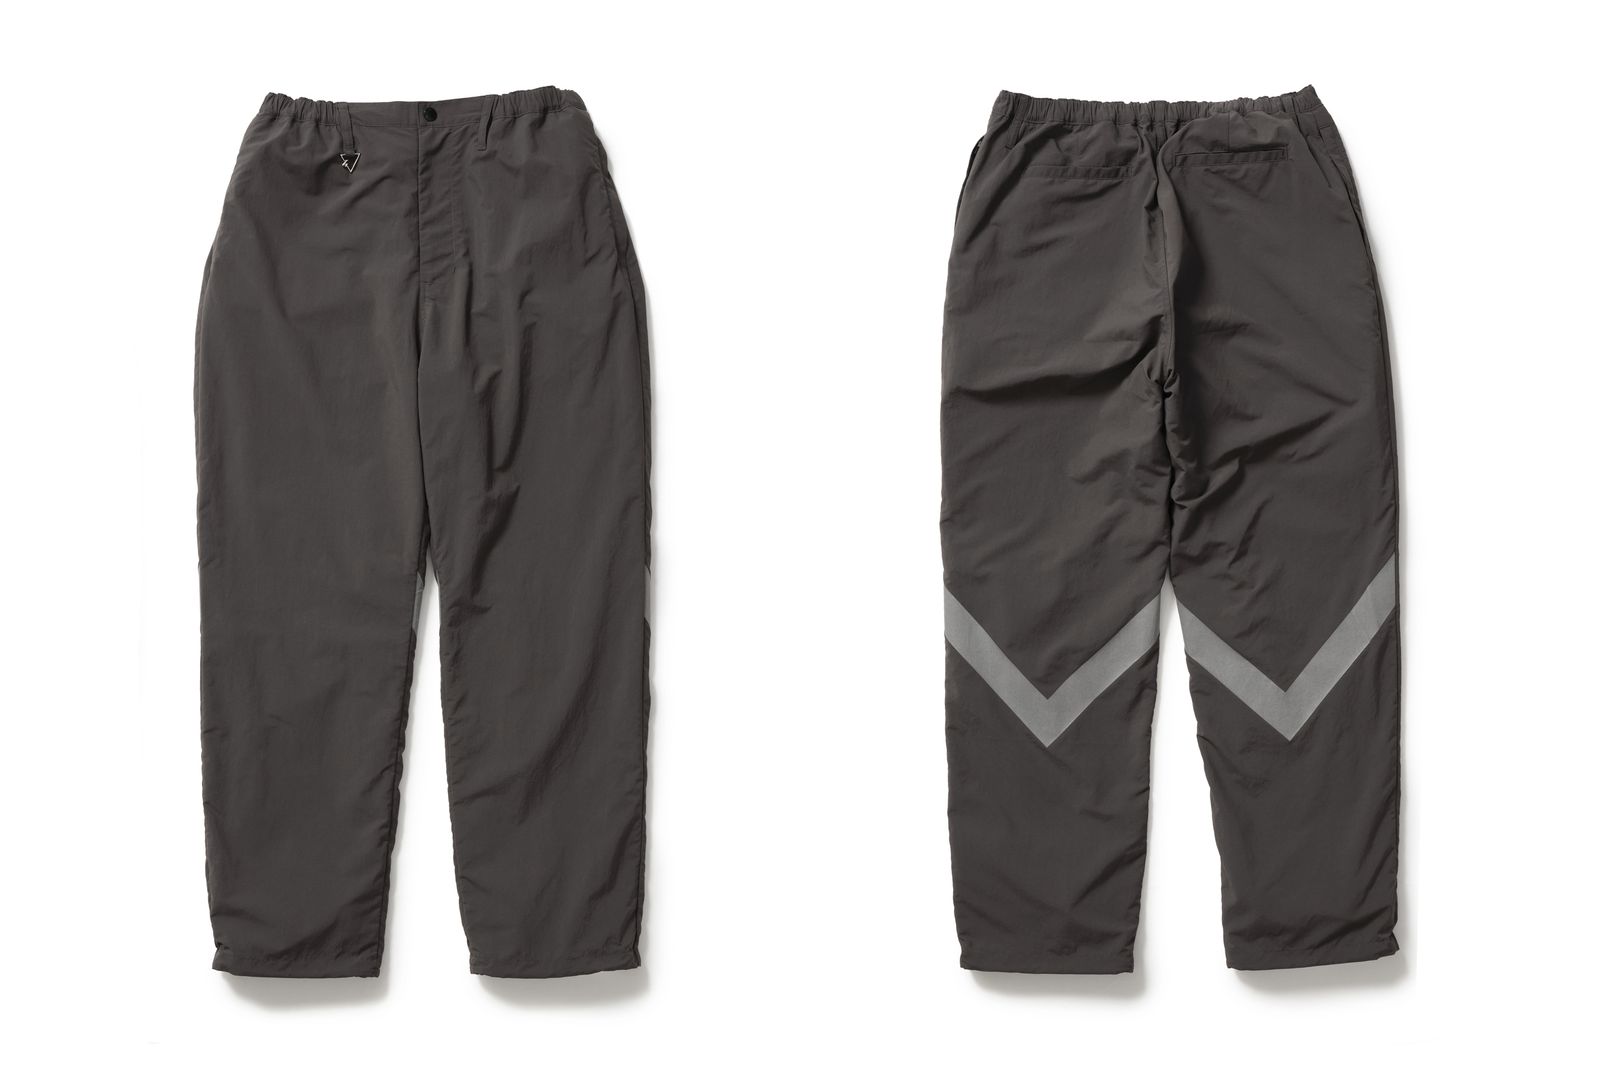 WHIZ LIMITED - WIND PANTS (CHARCOAL) / セットアップ トラックパンツ 